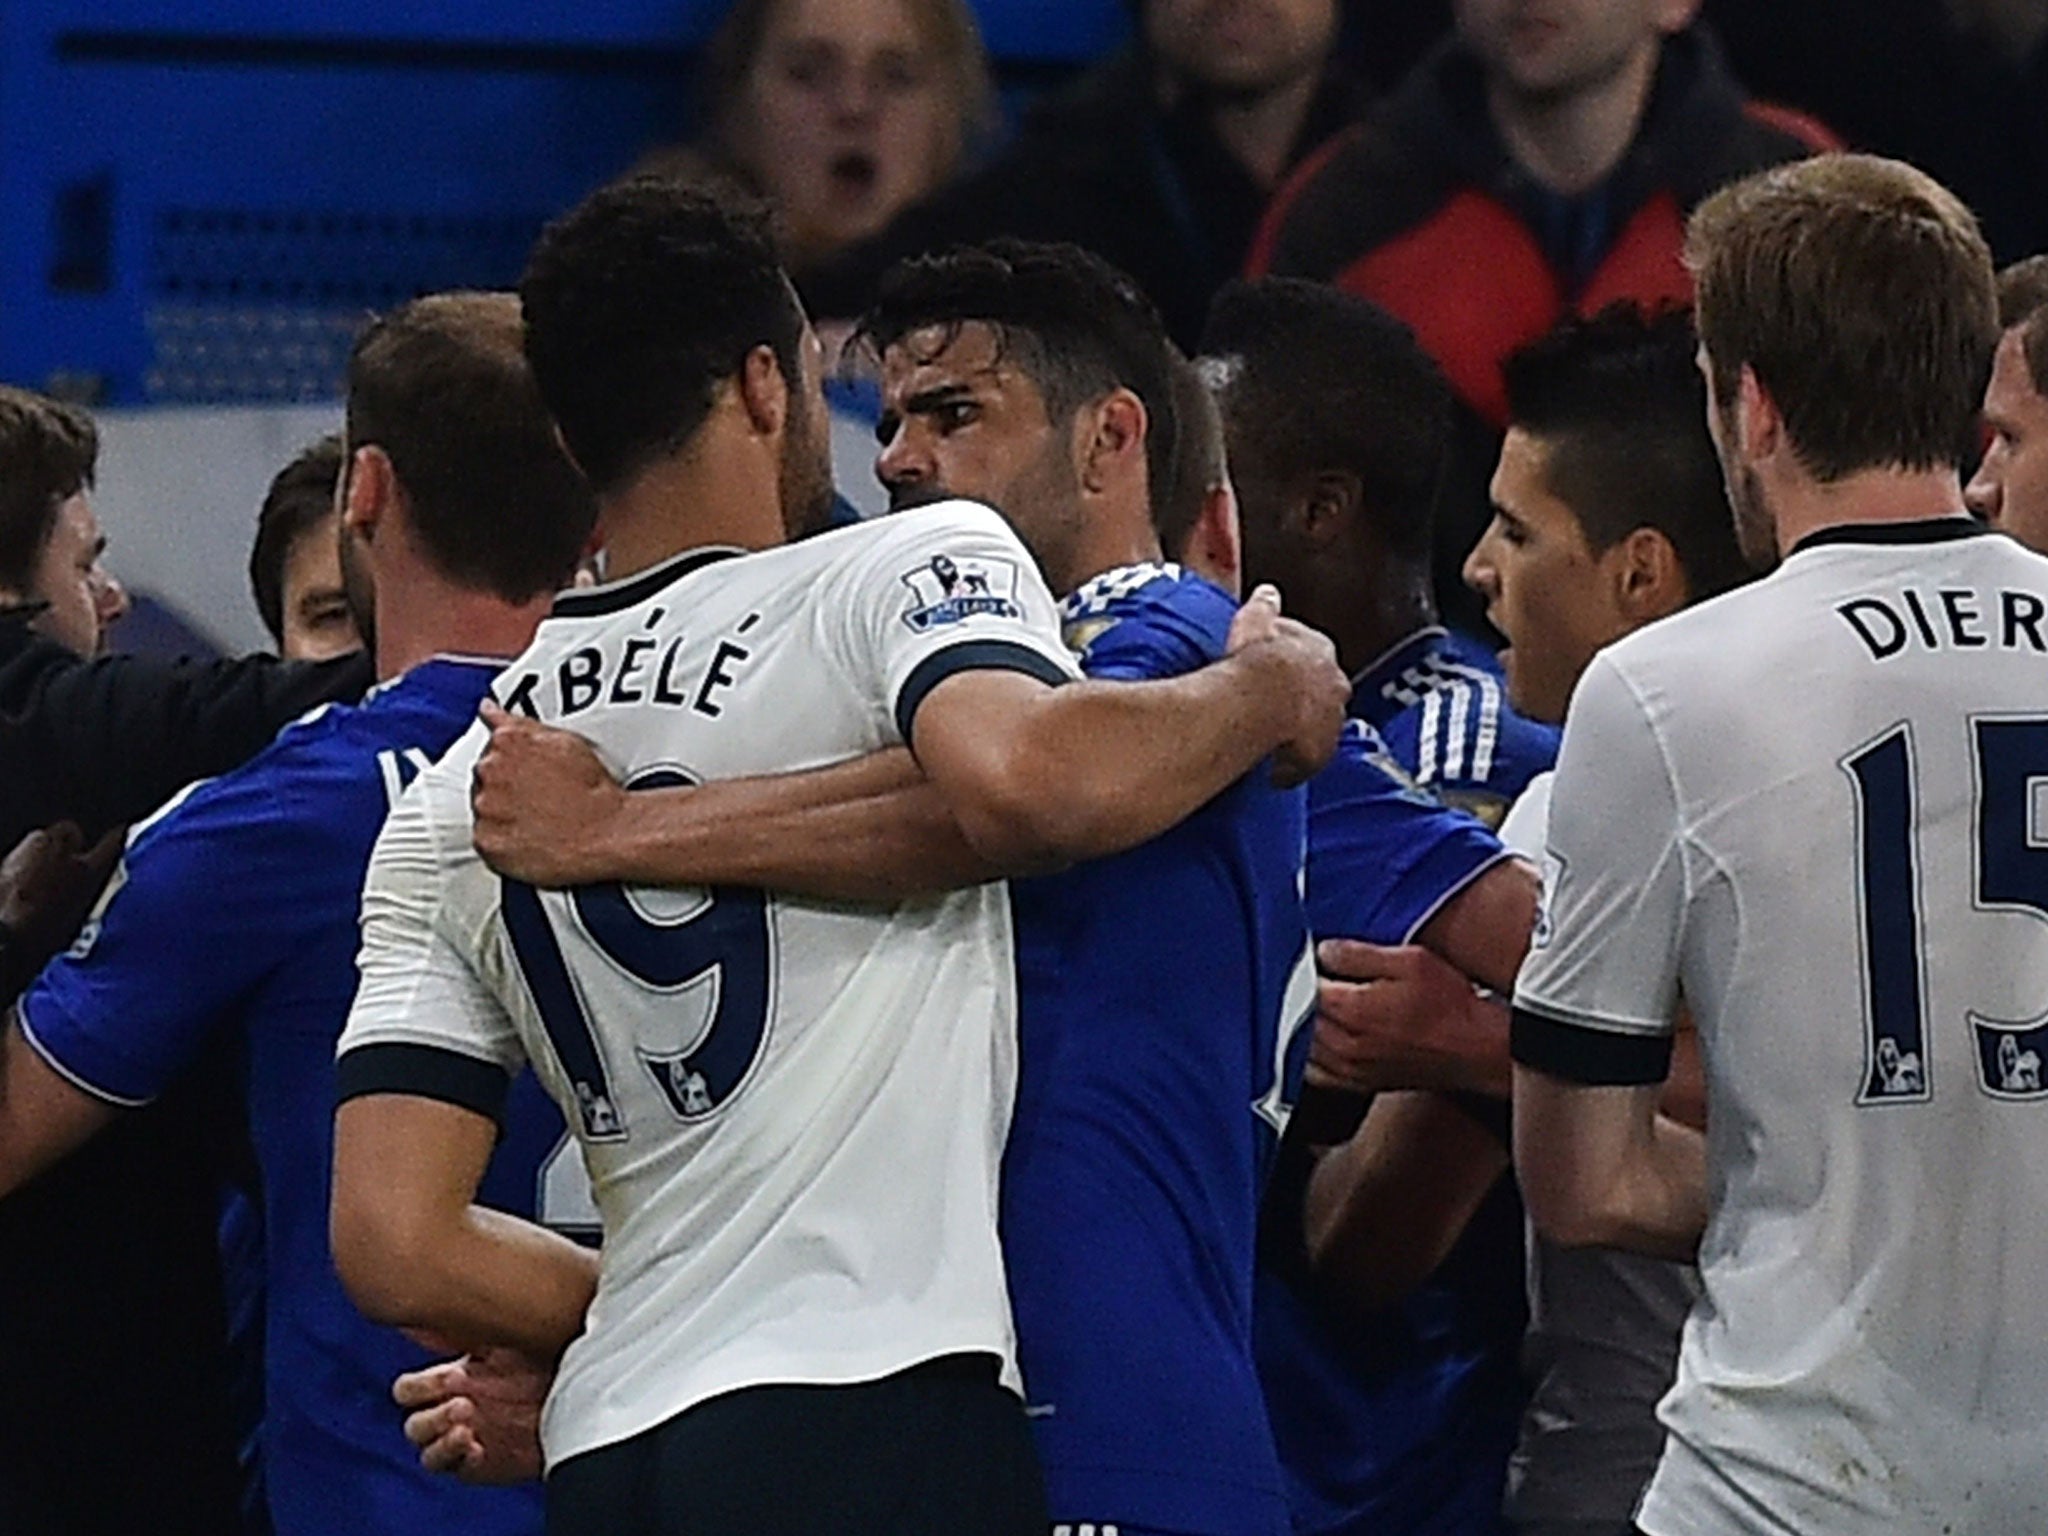 Mousa Dembele has been banned for six matches following an altercation with Chelsea forward Diego Costa at Stamford Bridge on Monday